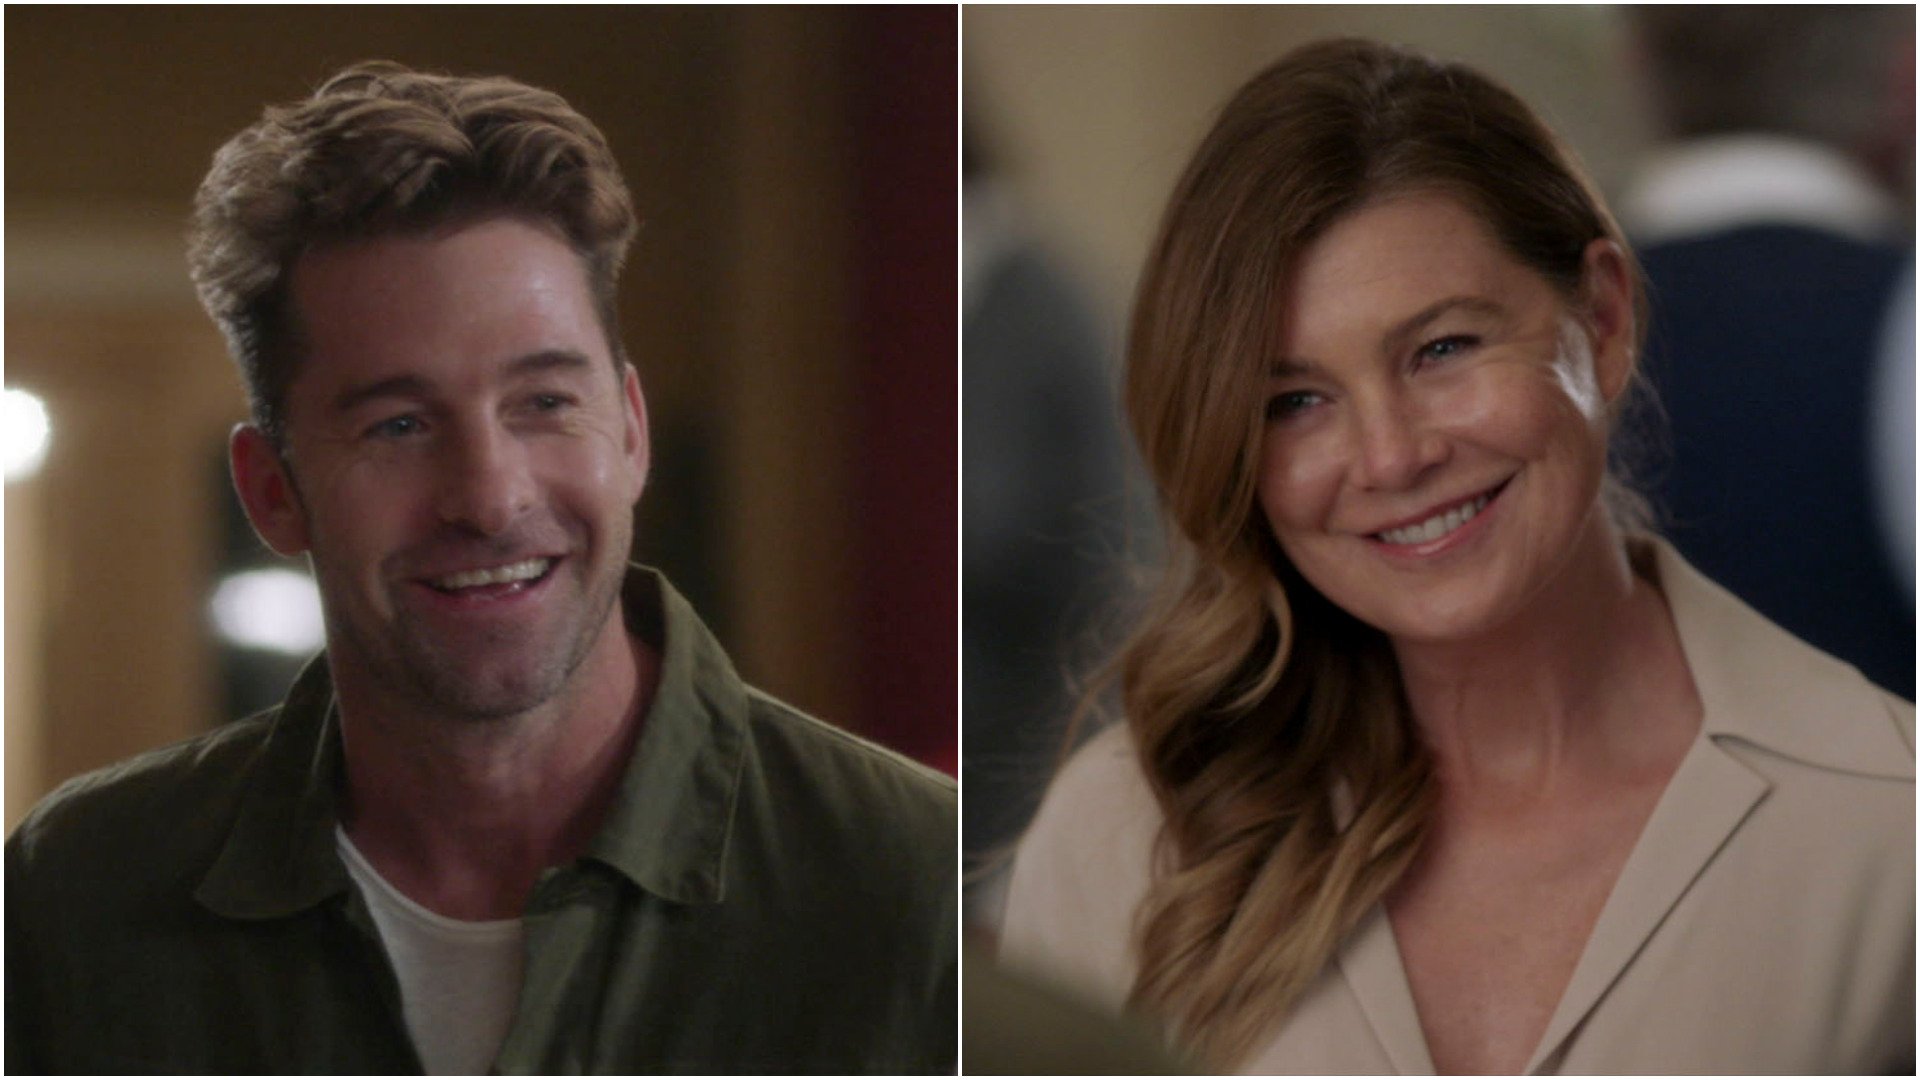 Scott Speedman as Nick Marsh and Ellen Pompeo as Meredith Grey about to go out on a date in ‘Grey’s Anatomy’ Season 18 Episode 2